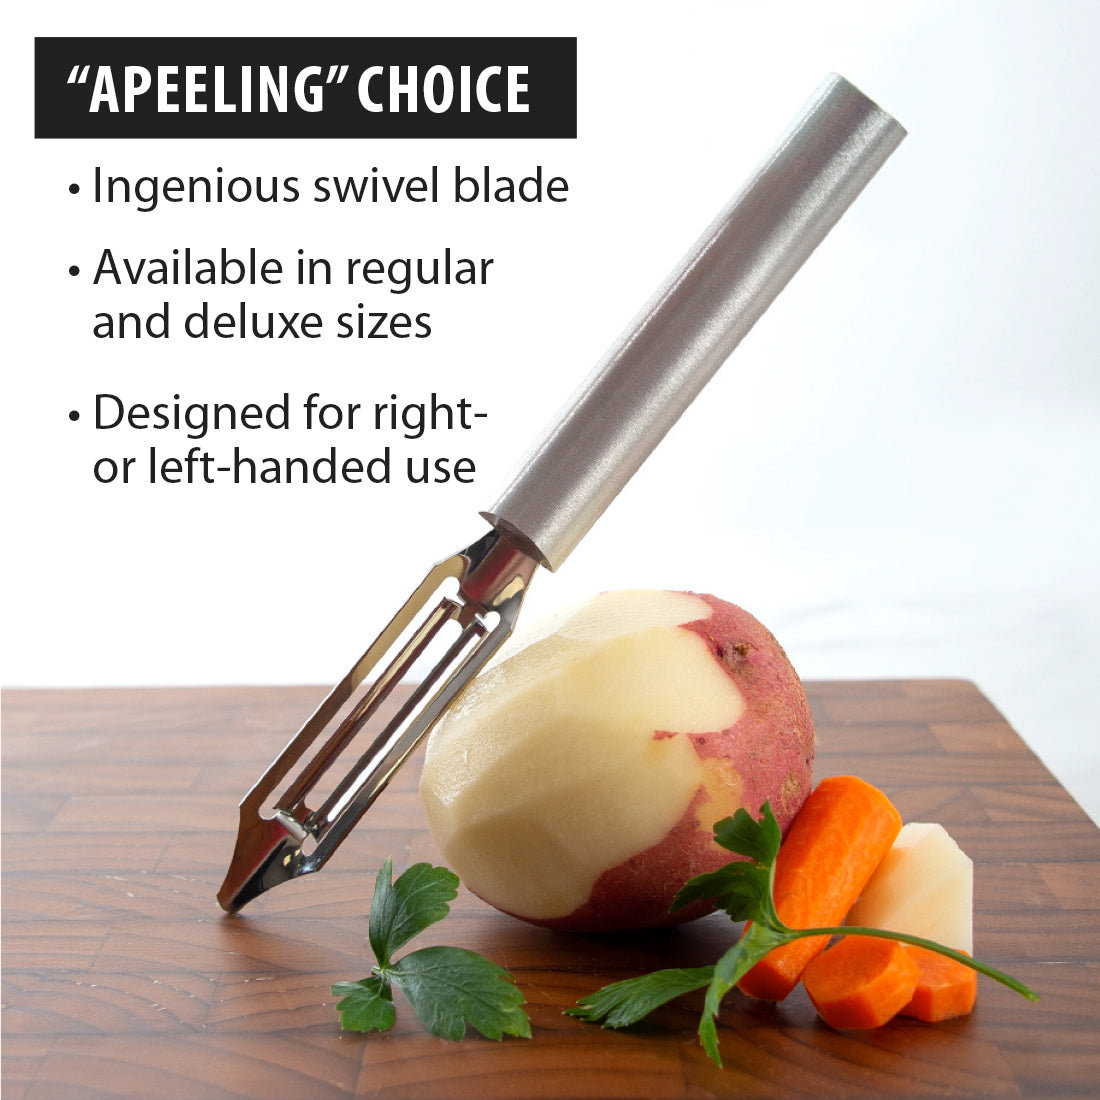 Peeler with your logo